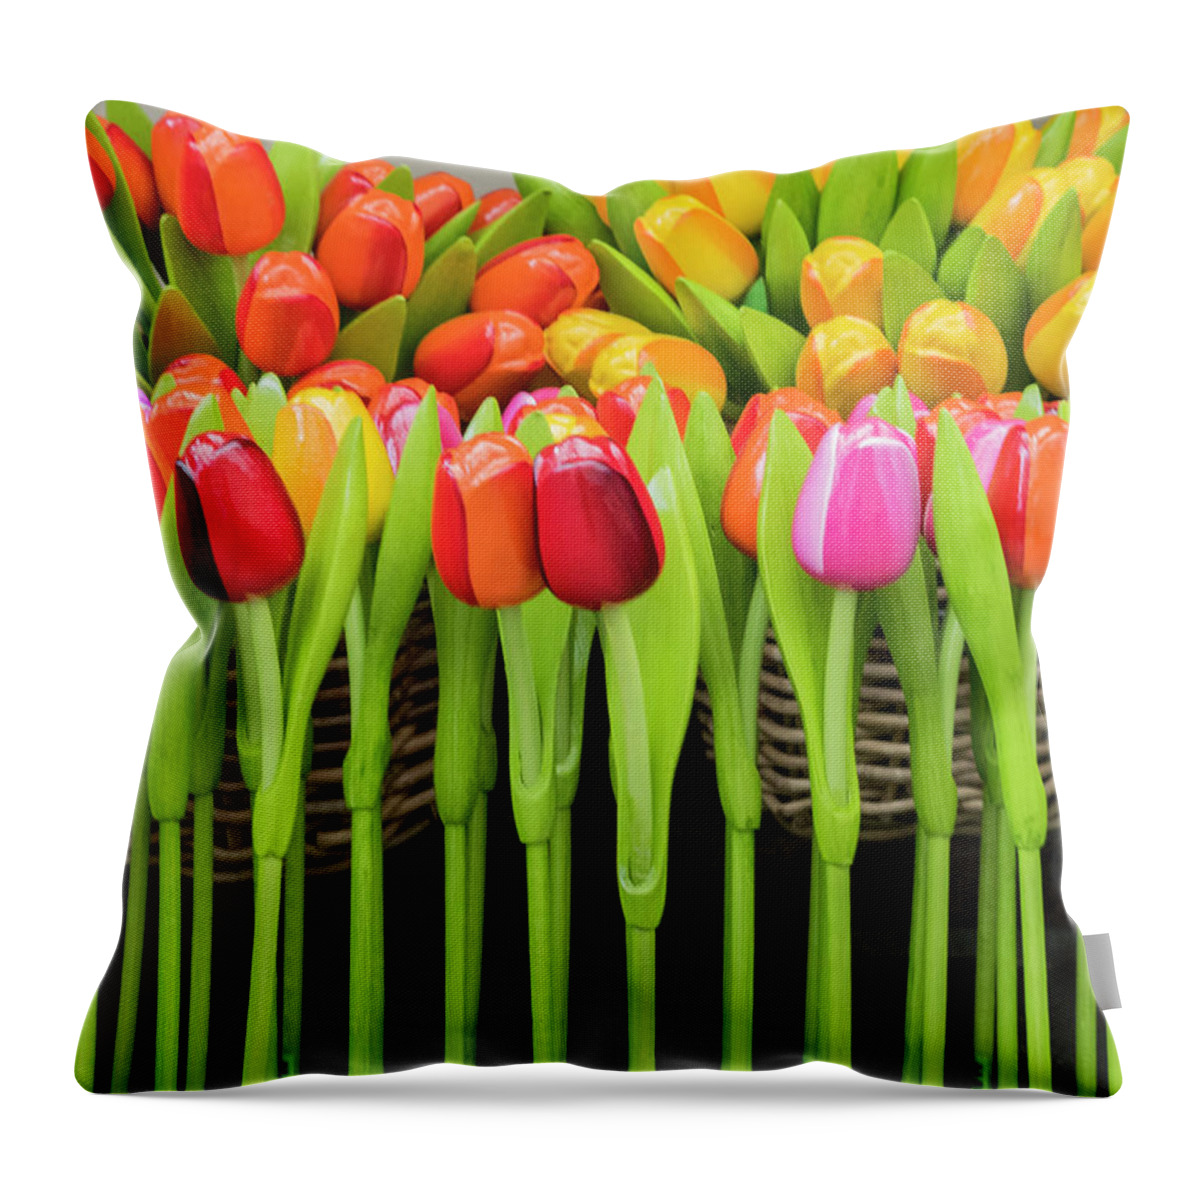 Agricultural Throw Pillow featuring the photograph Wooden Tulips by Eggers Photography